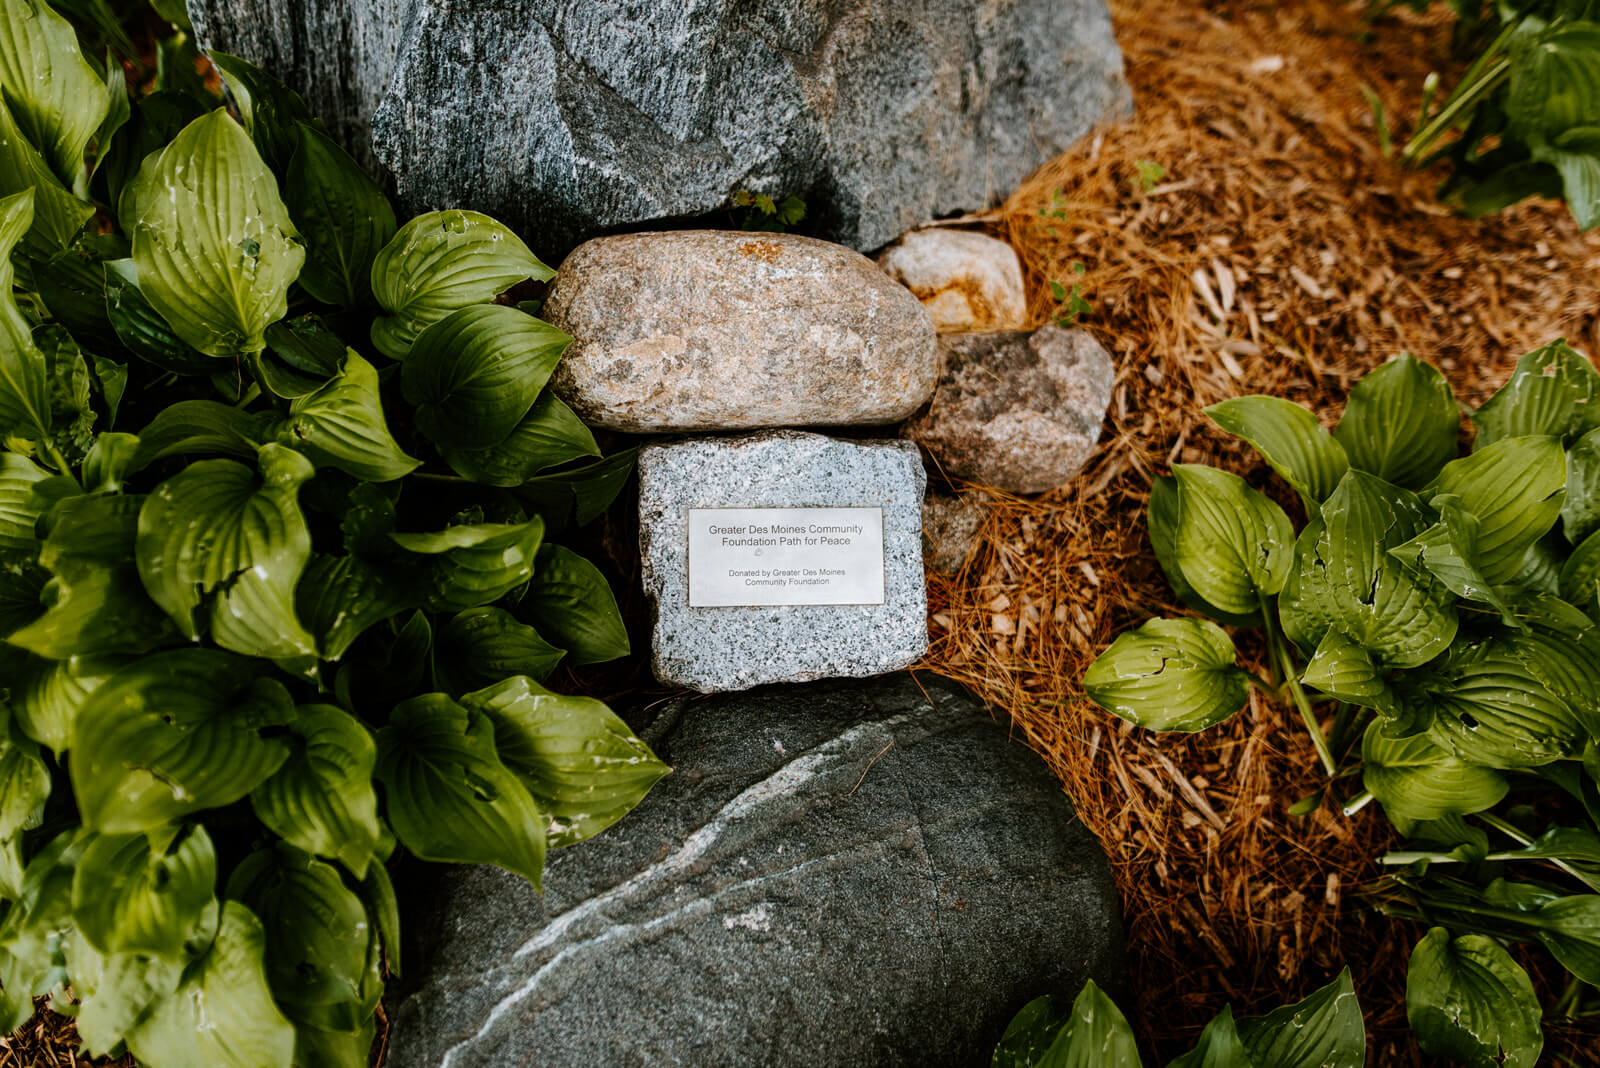 A small stone engraved with the the words "Greater Des Moines Community Foundation Path for Peace"